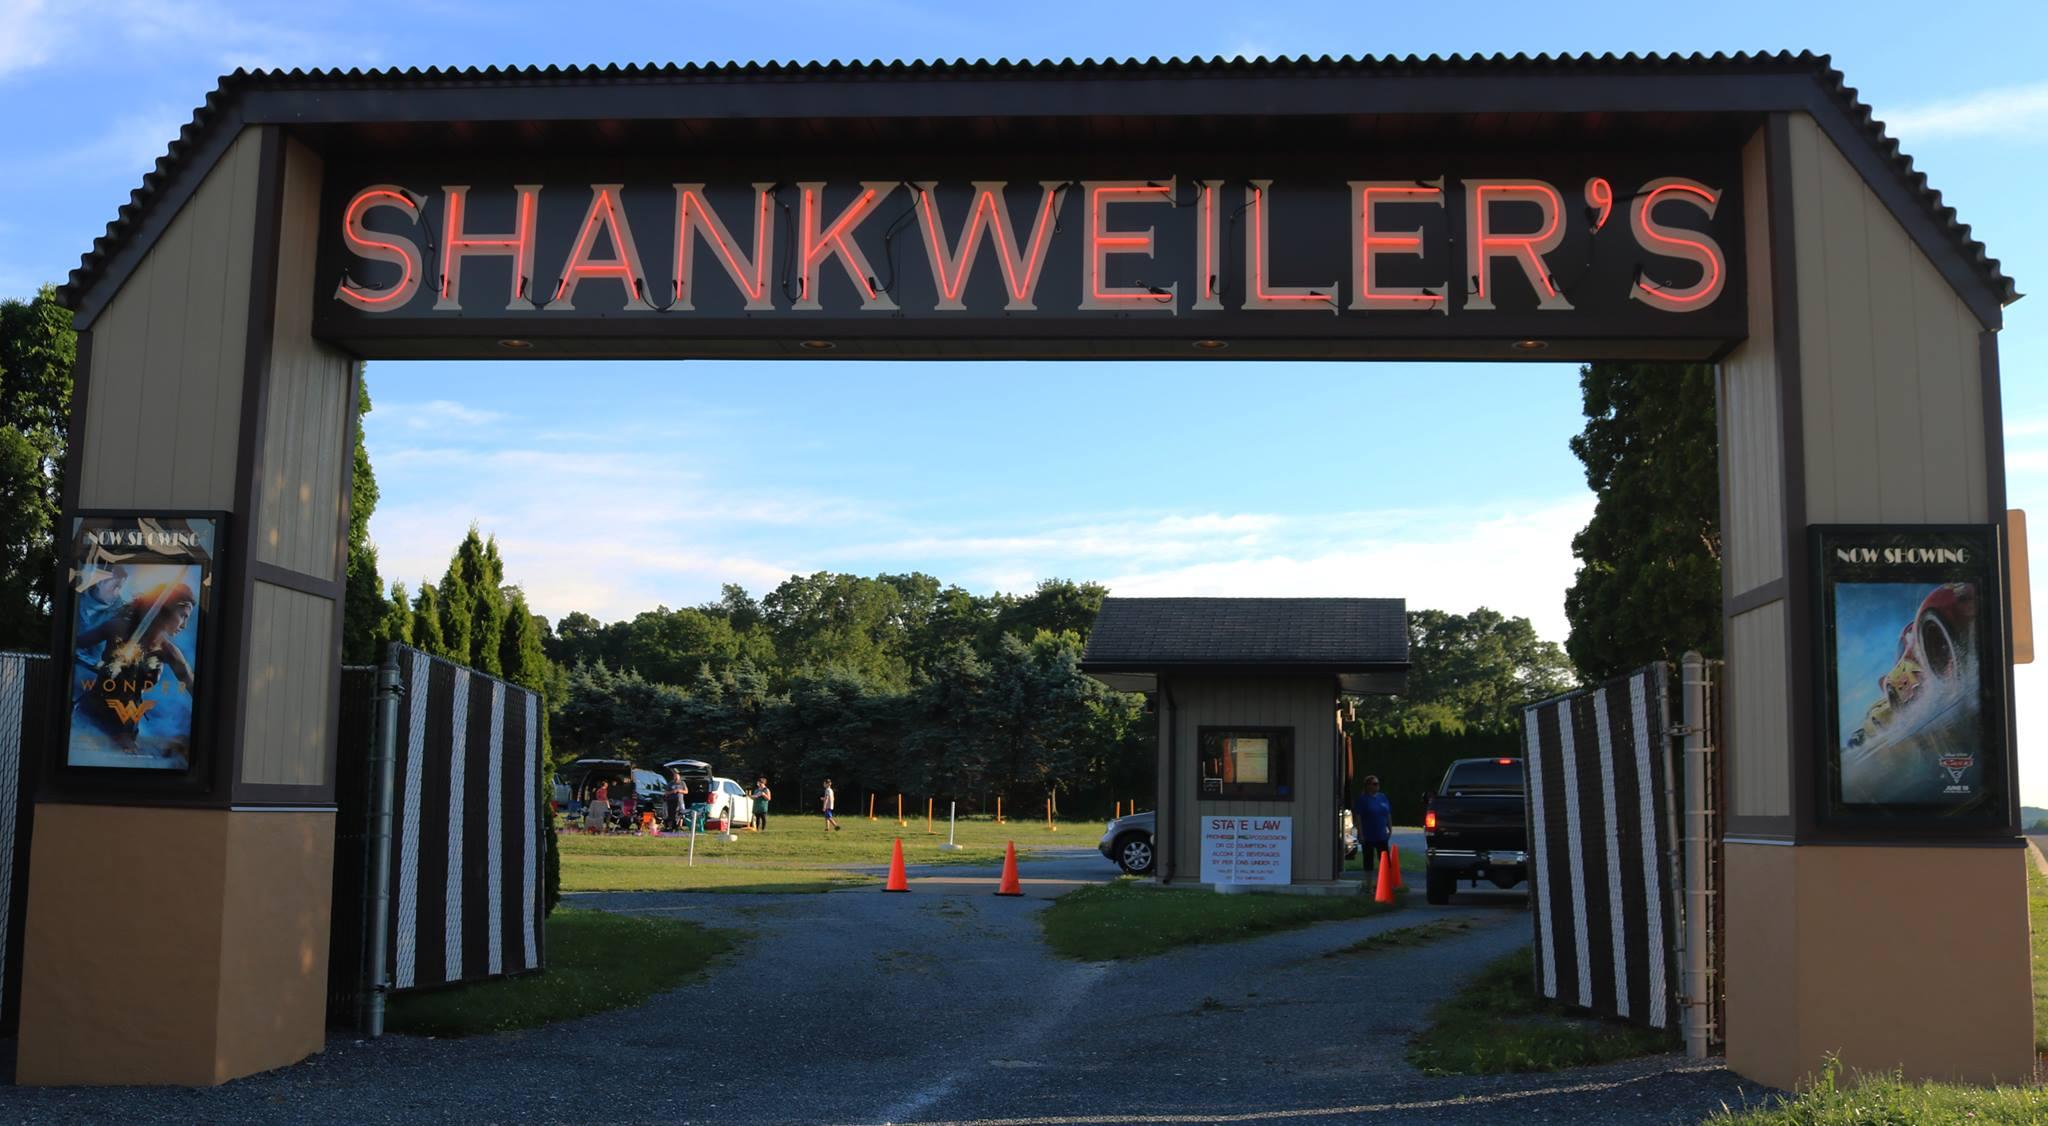 Pet Friendly Shankweiler's Drive-In Theatre